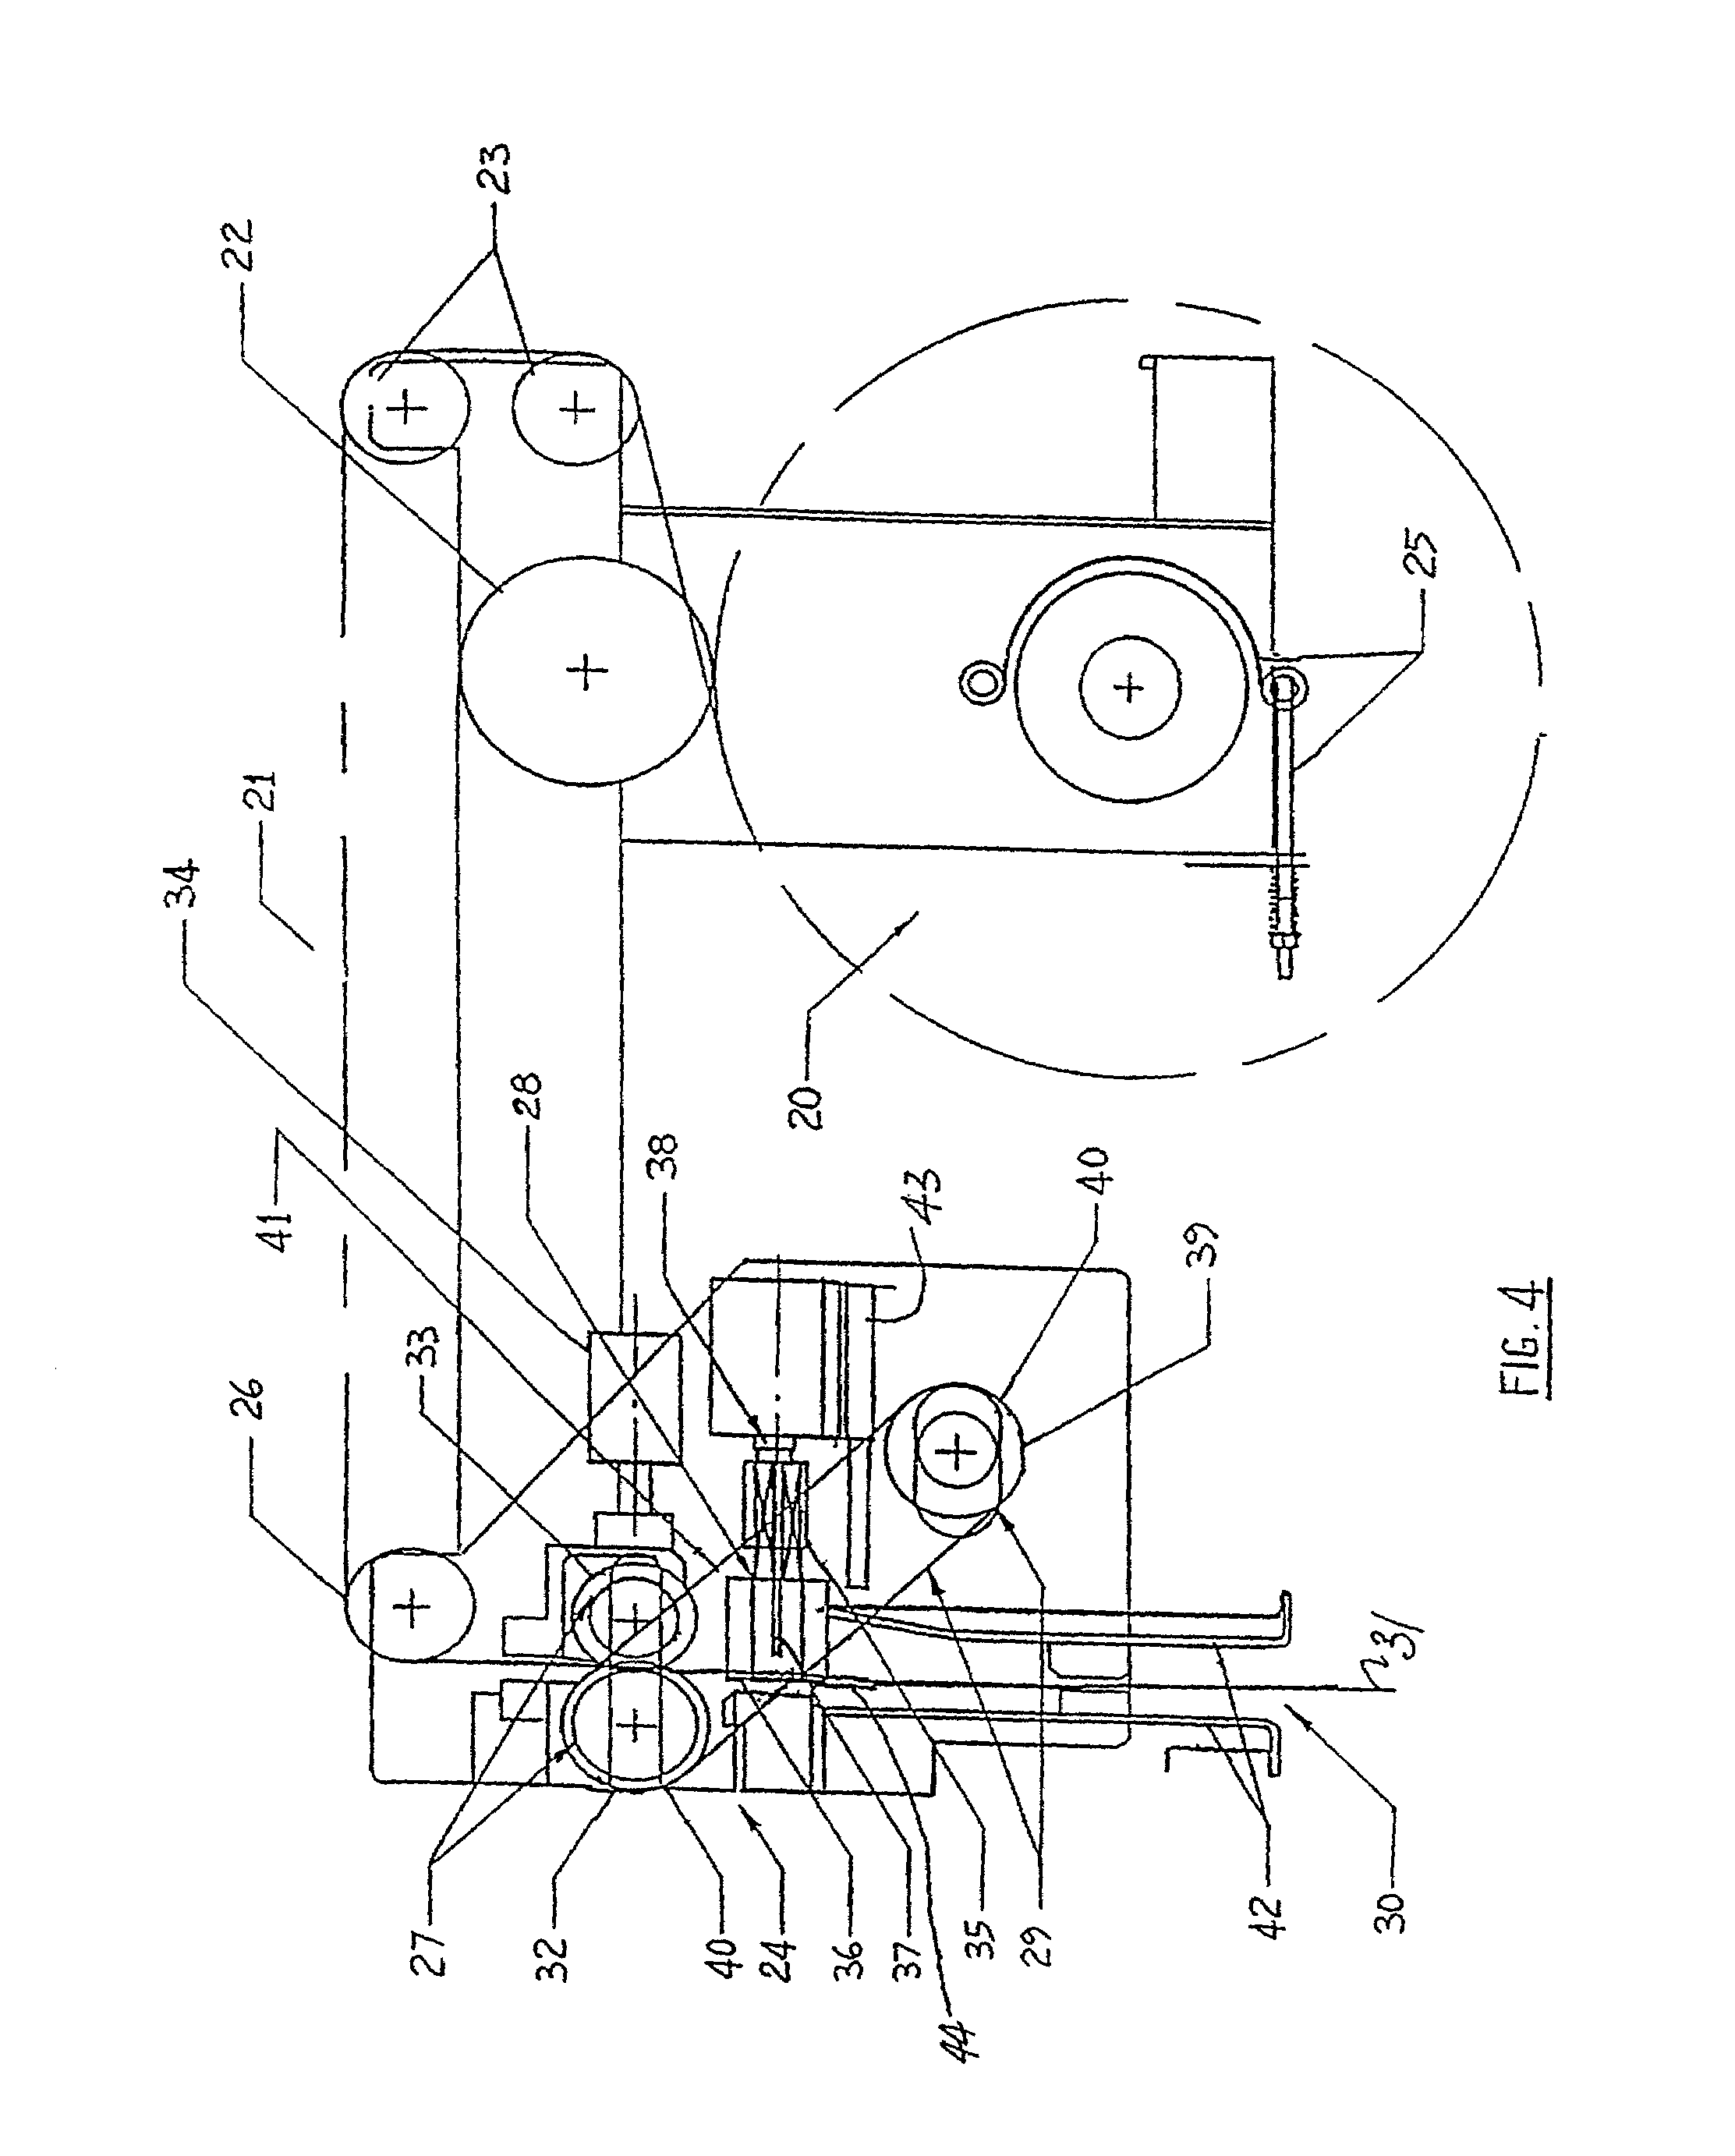 Apparatus and method for making bags of different dimensions